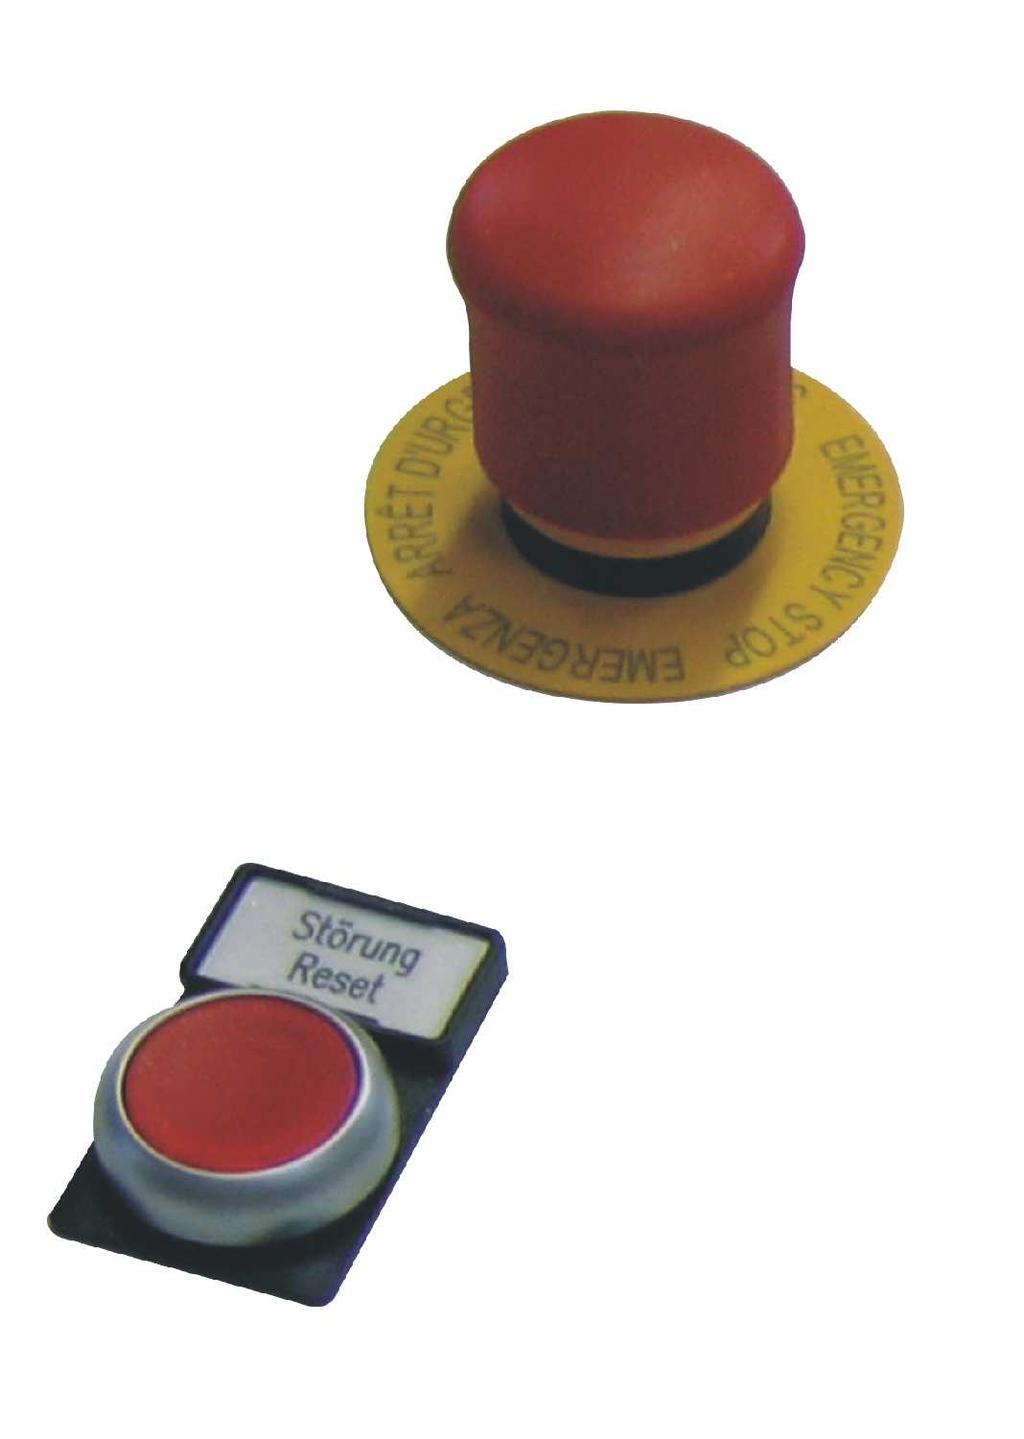 2-8 Introduction Lockable main switch Fig. 2-3 Alockablemainswitchislocatedonthecontrolcabinetorcontrolconsoleof the extruder. The colour identification is a red handle on a yellow background.